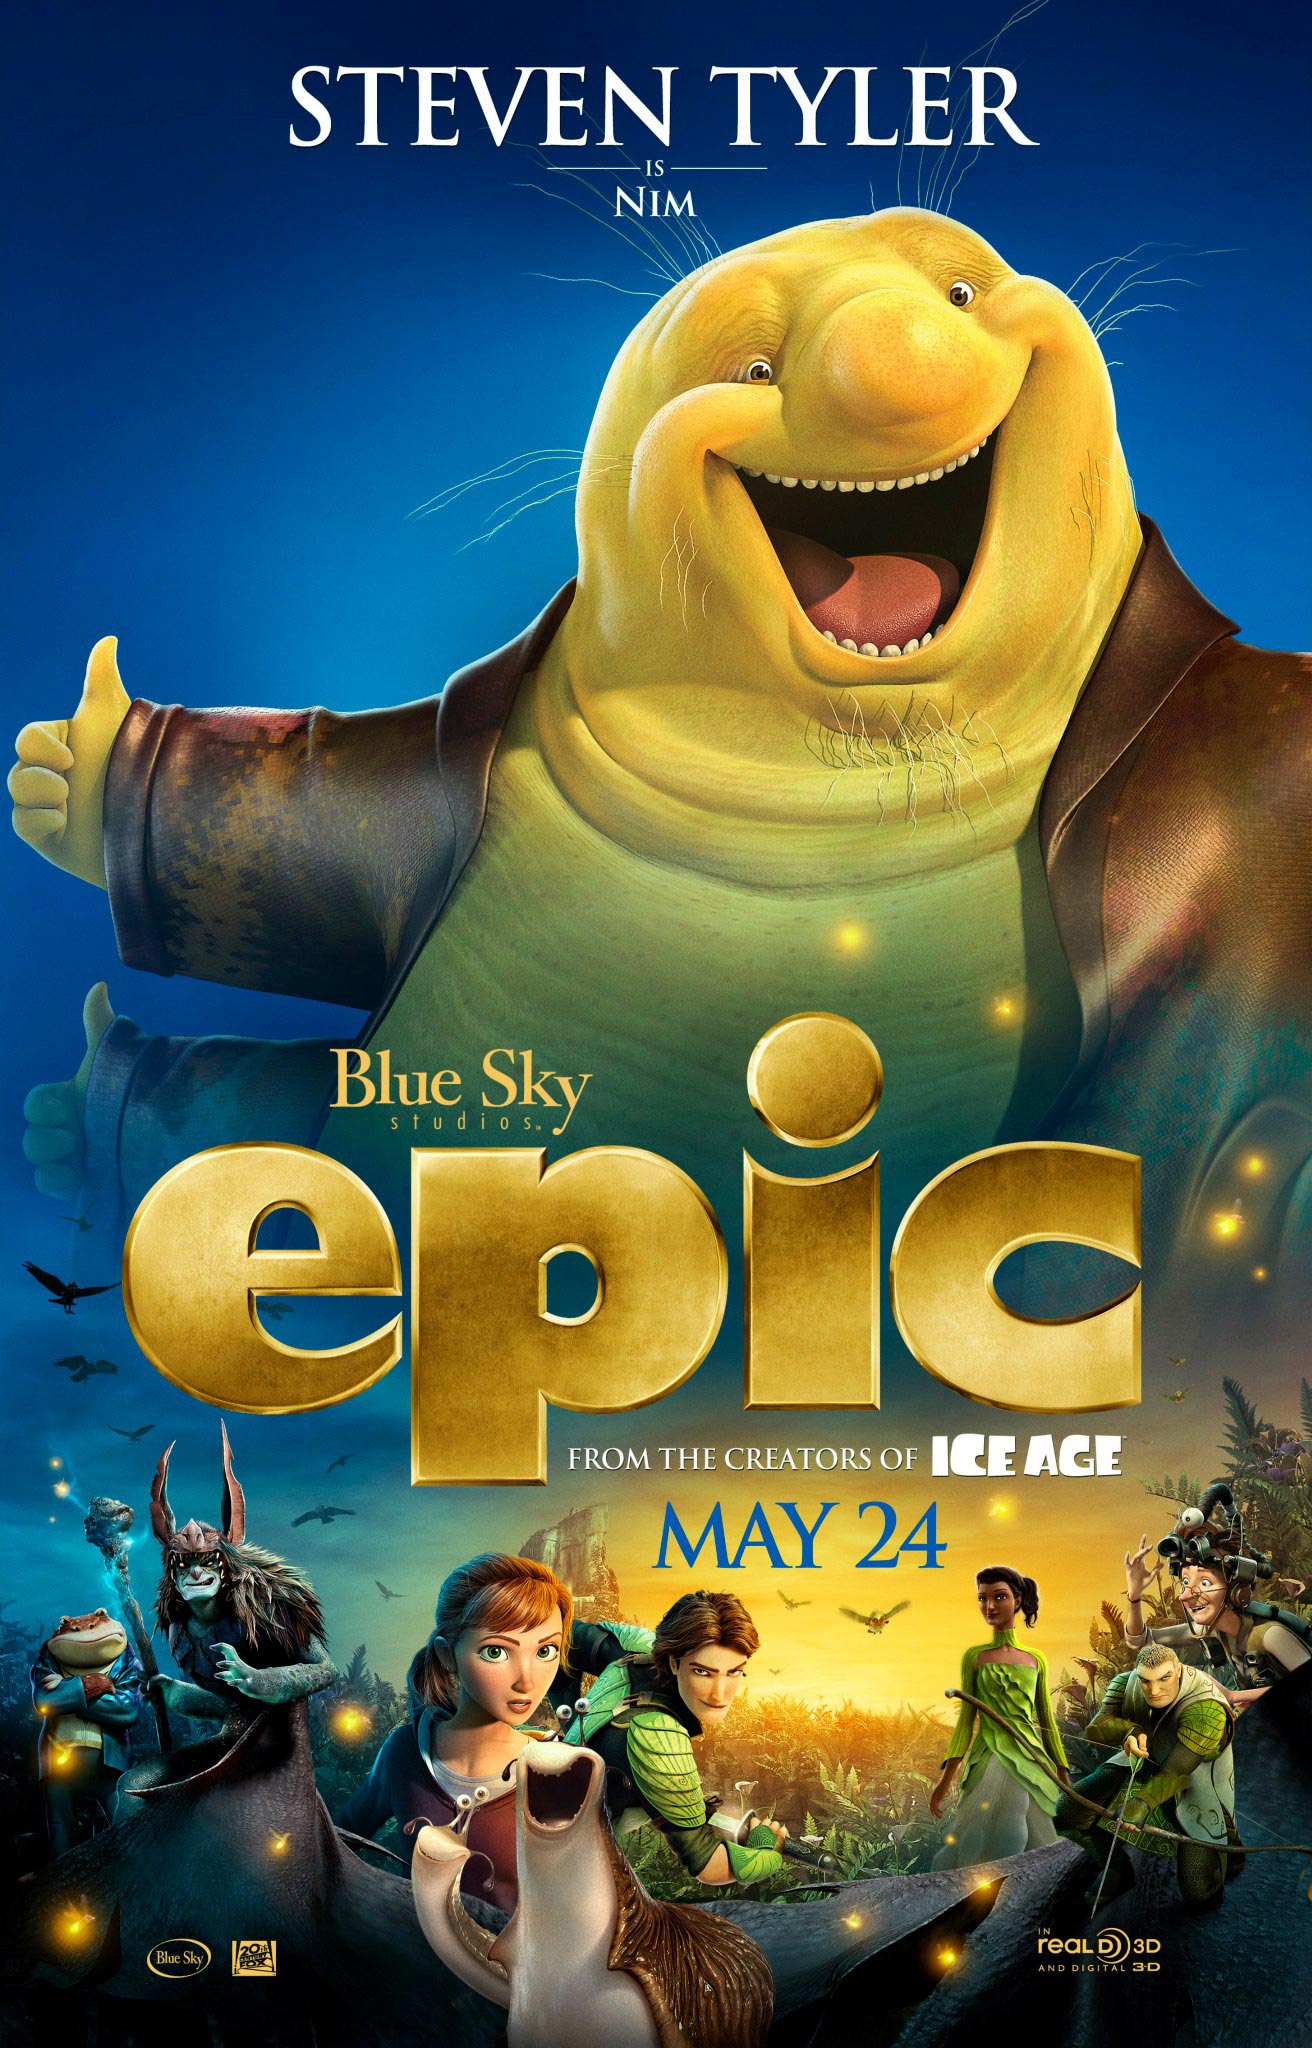 EPIC 20 Posters!